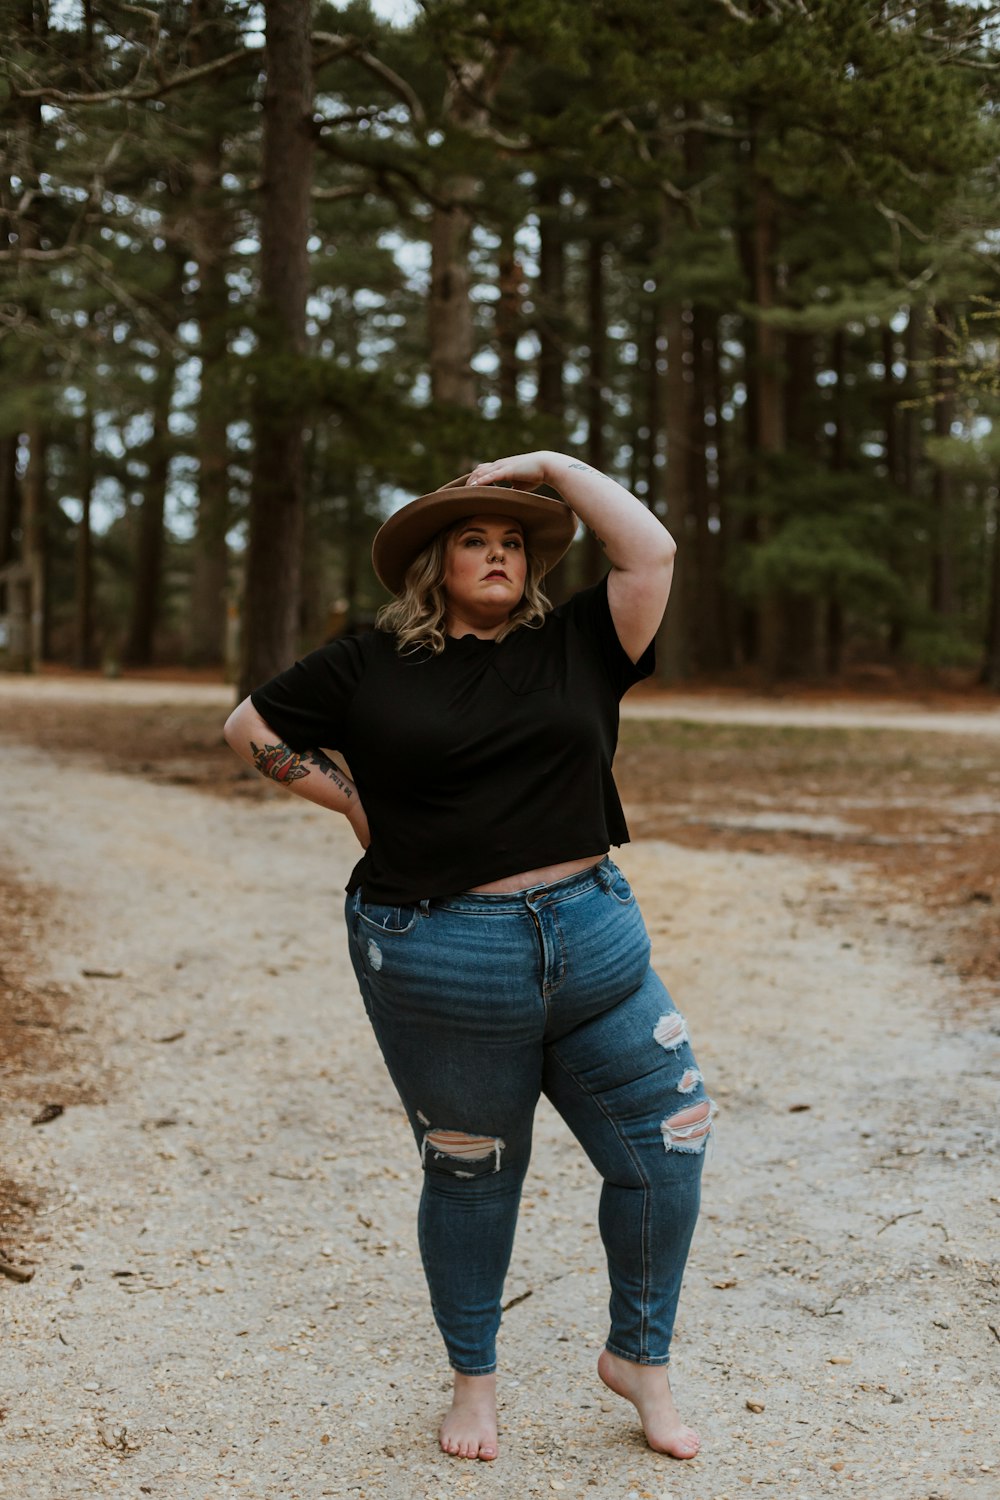 woman in black t-shirt and blue denim jeans standing on dirt road during  daytime photo – Free Body positive Image on Unsplash